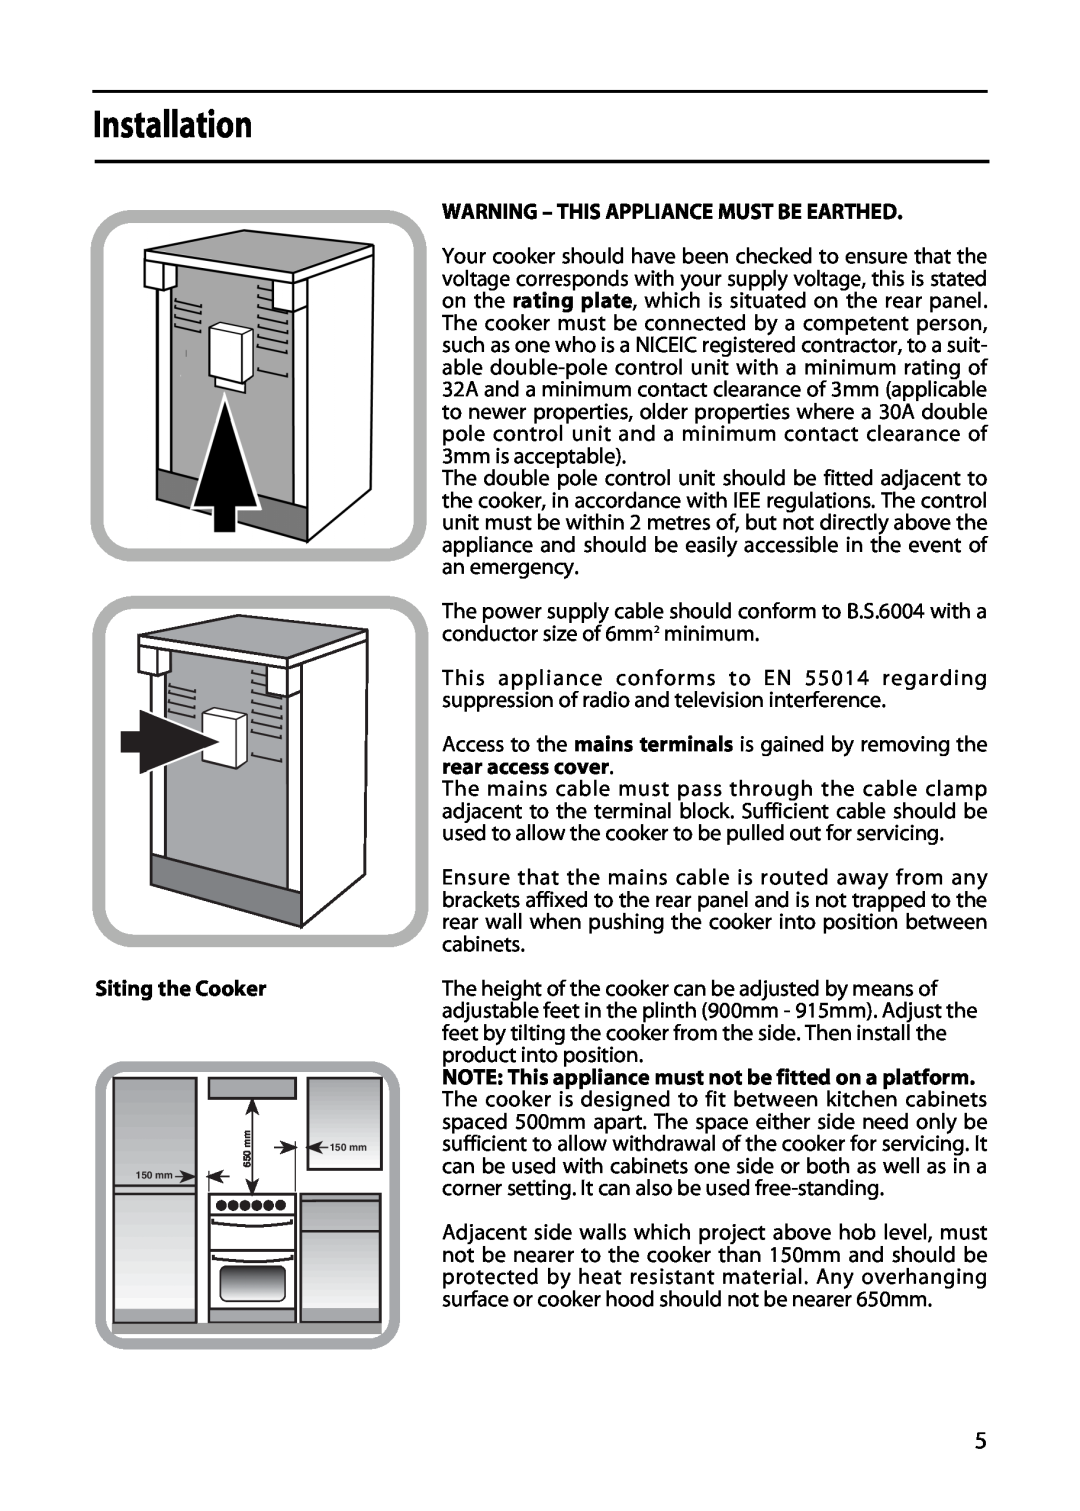 Hotpoint X153E, X253E, X156E, C220E manual Installation, Siting the Cooker, Warning - This Appliance Must Be Earthed 